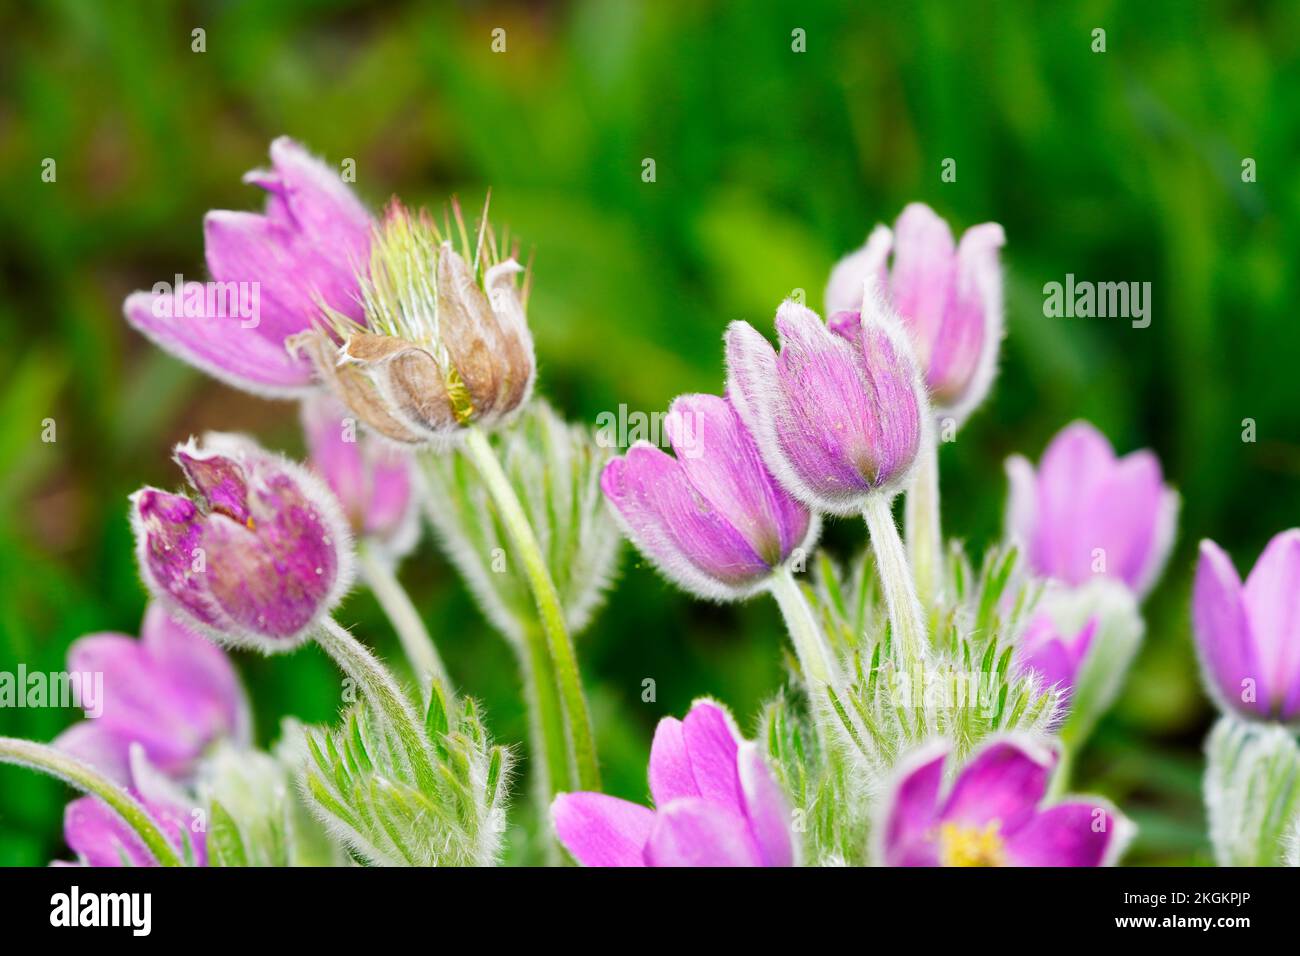 Flowers of the Pasque Flower, Anemone pulsatilla. Flowering plant close-up. Stock Photo